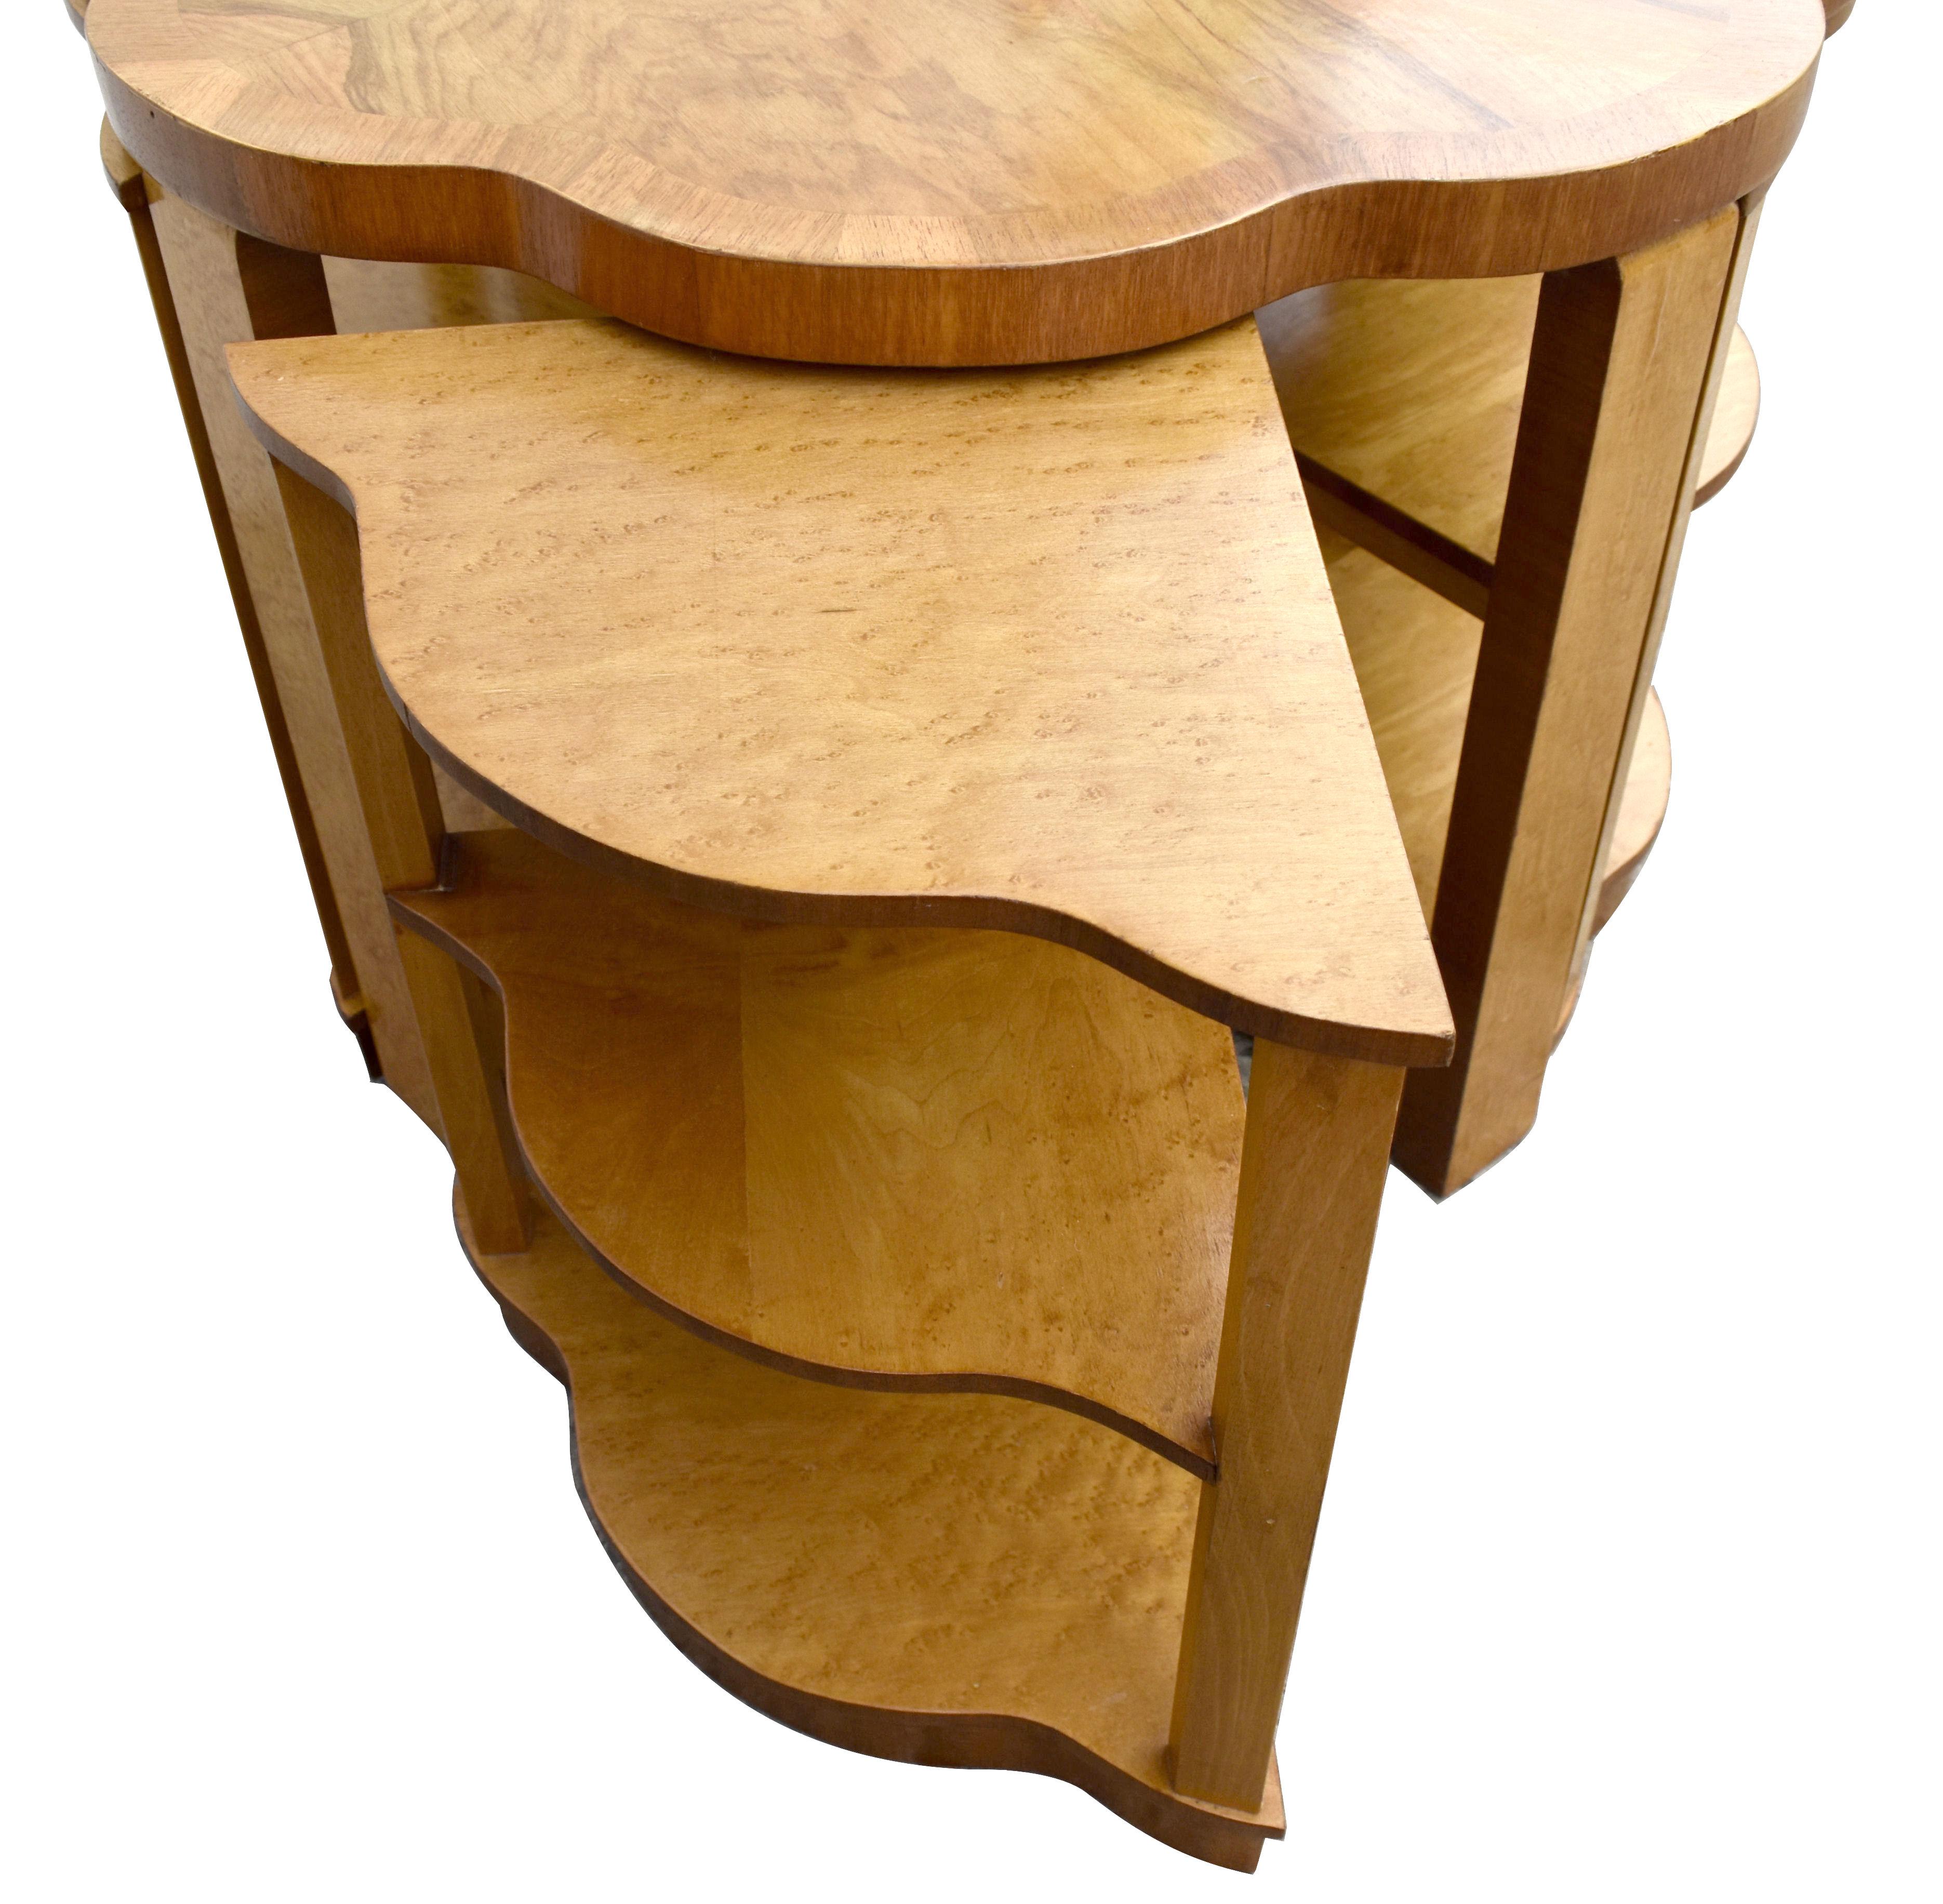 20th Century Art Deco High Quality Walnut & Maple Nest of 5 Tables by Epstein, English, 1930 For Sale